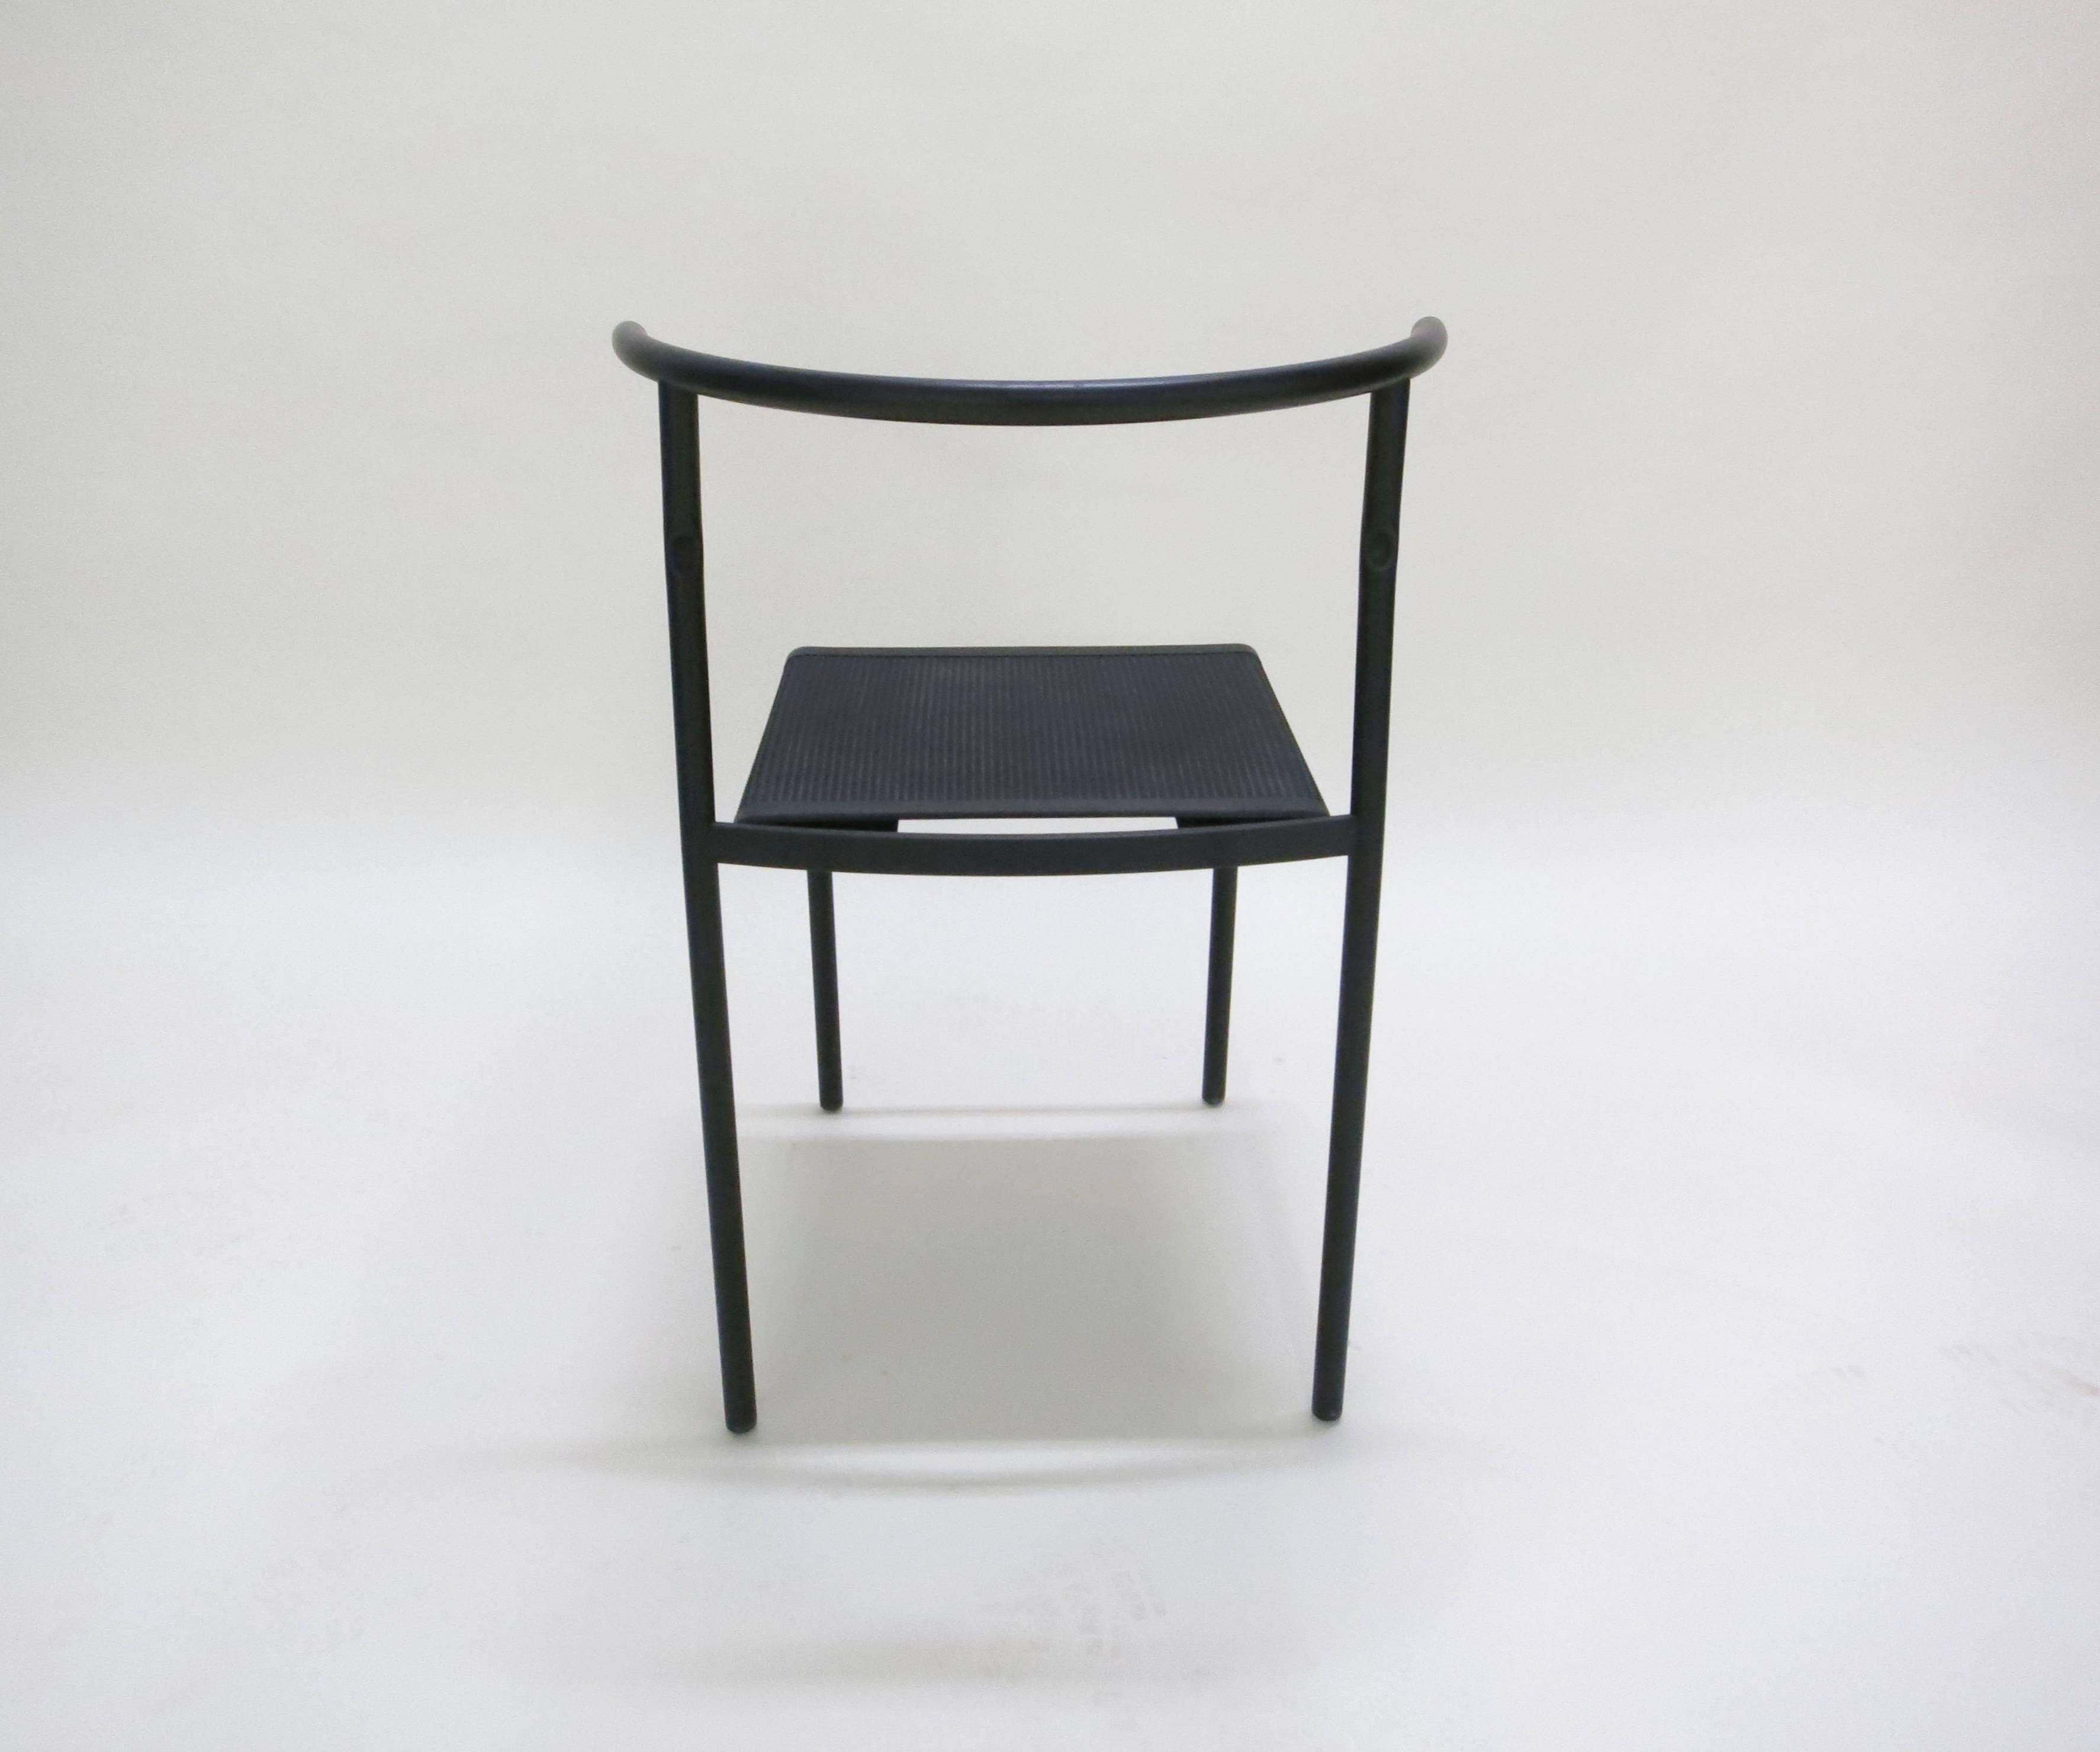 Steel Pair of Stacking Chairs by Philippe Starck for Baleri, Italy 1984